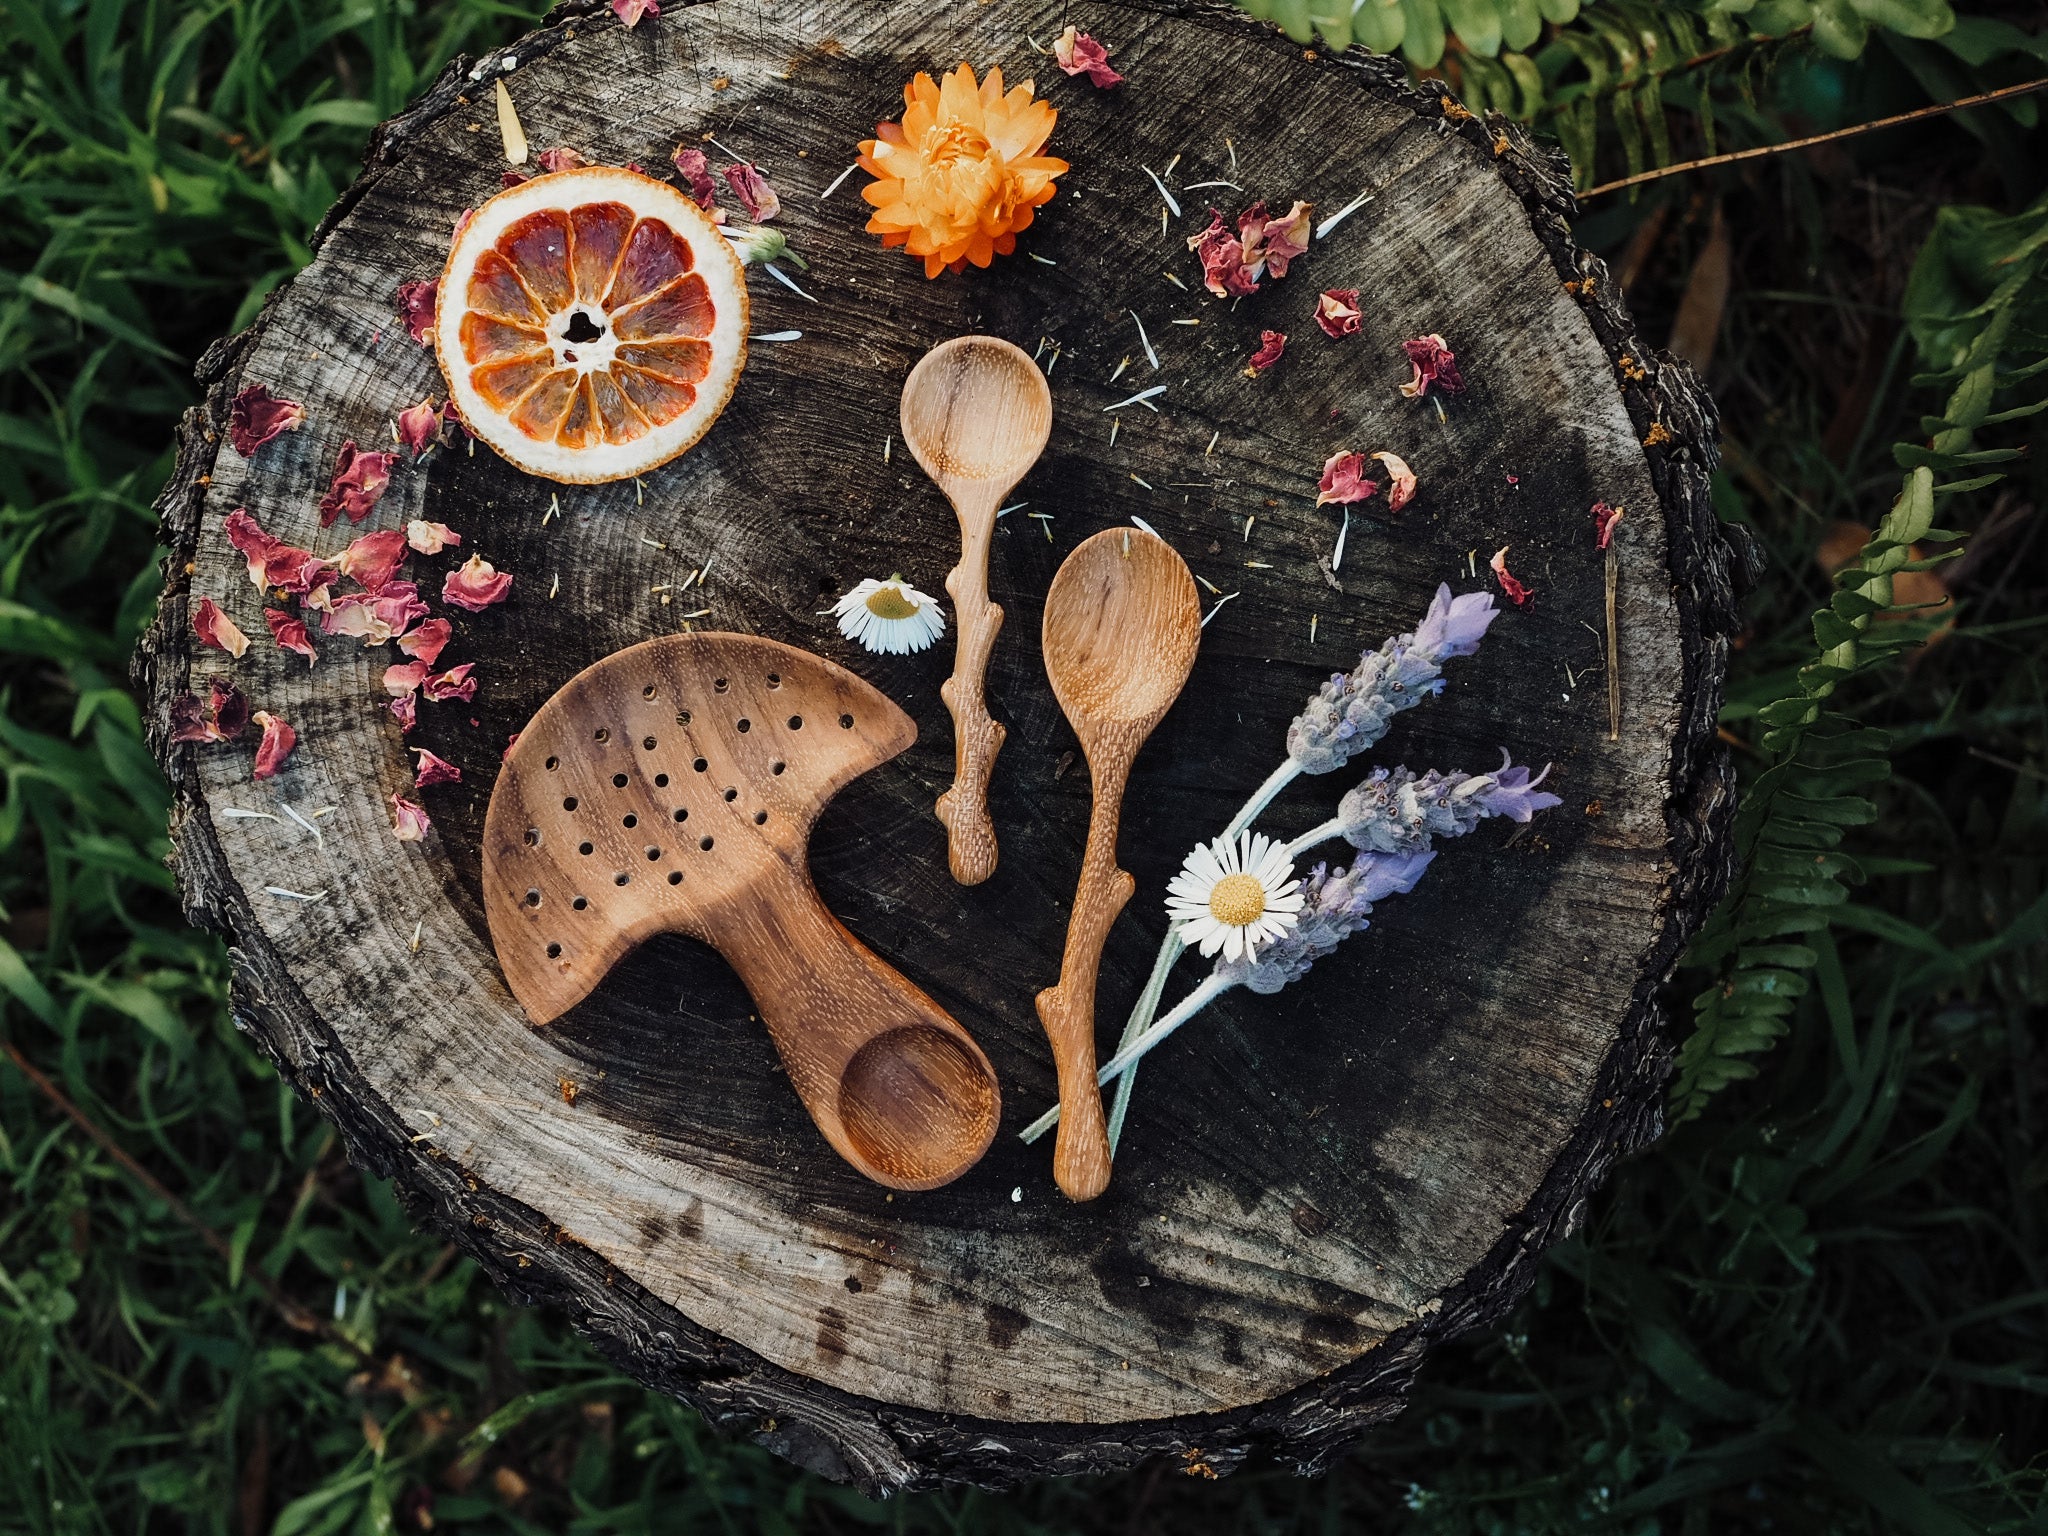 Whimsical Wild Tree Tools Collection